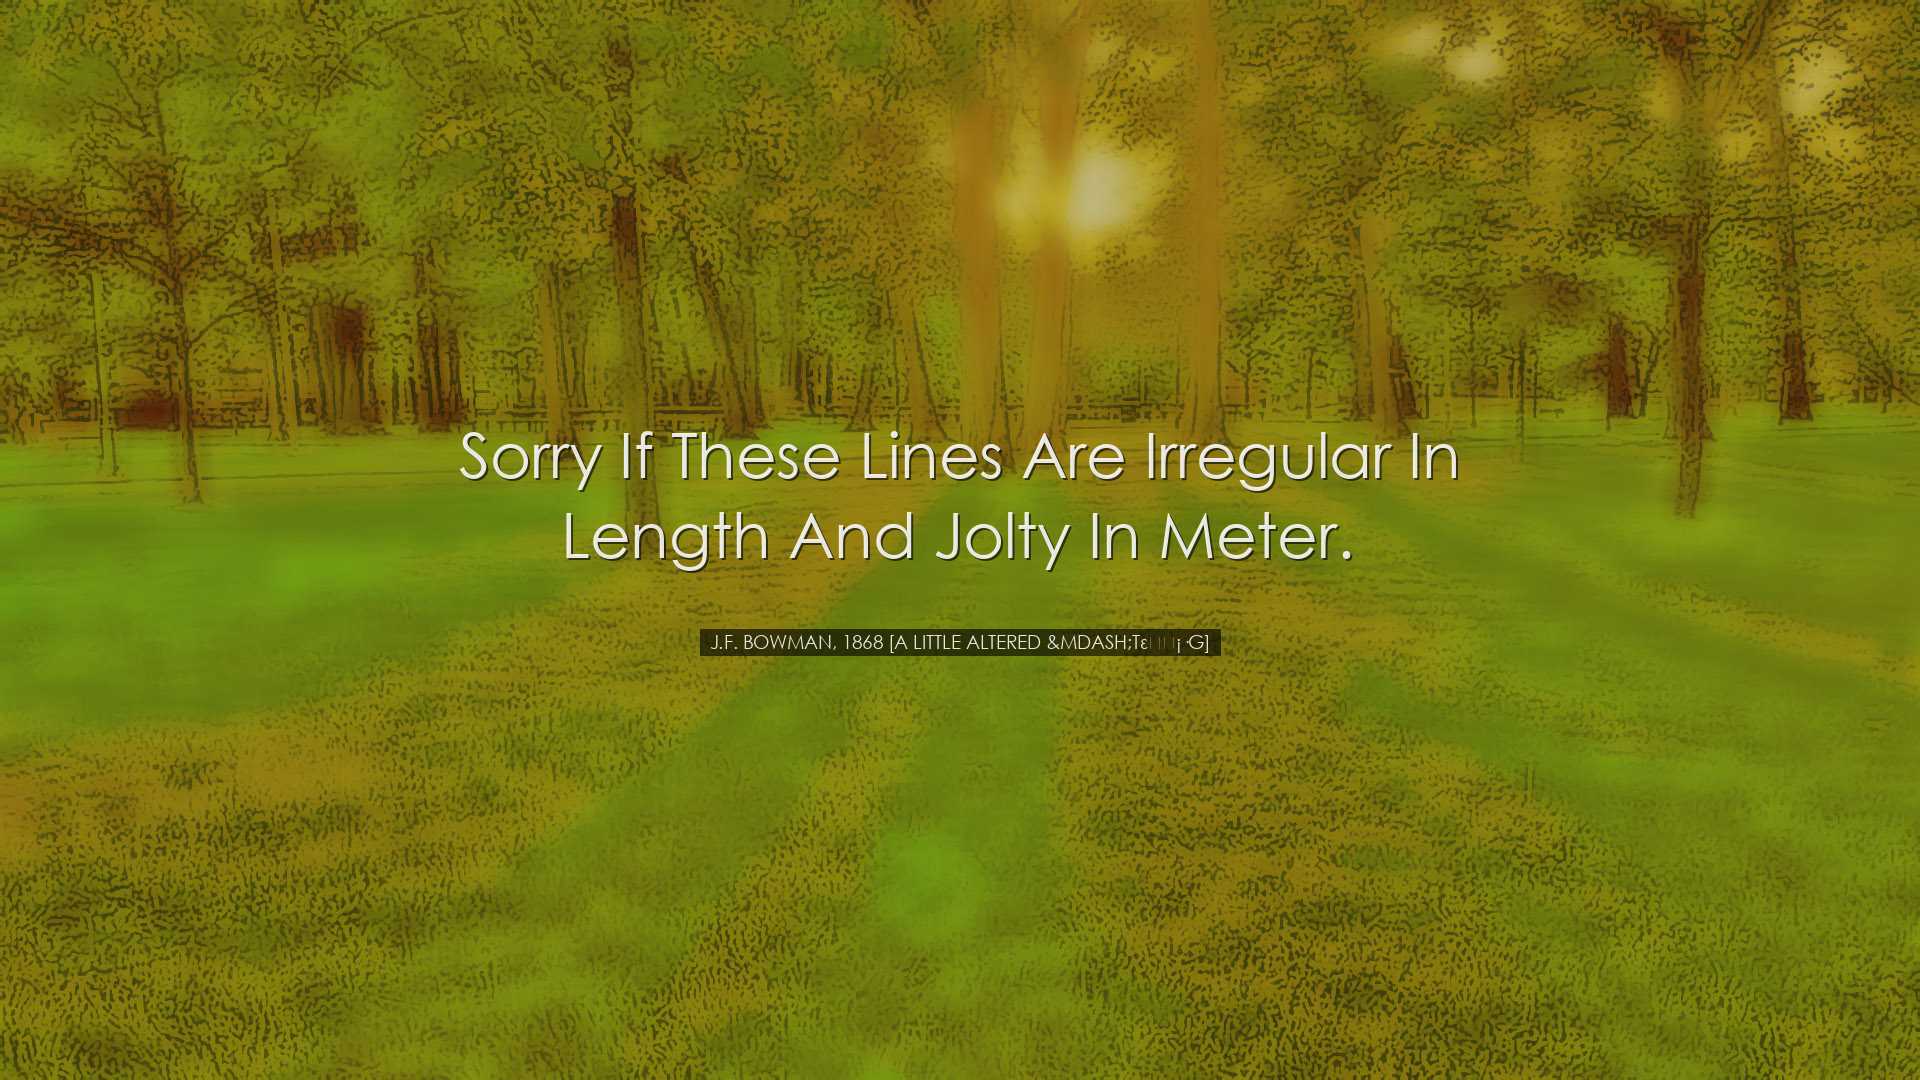 Sorry if these lines are irregular in length and jolty in meter. -